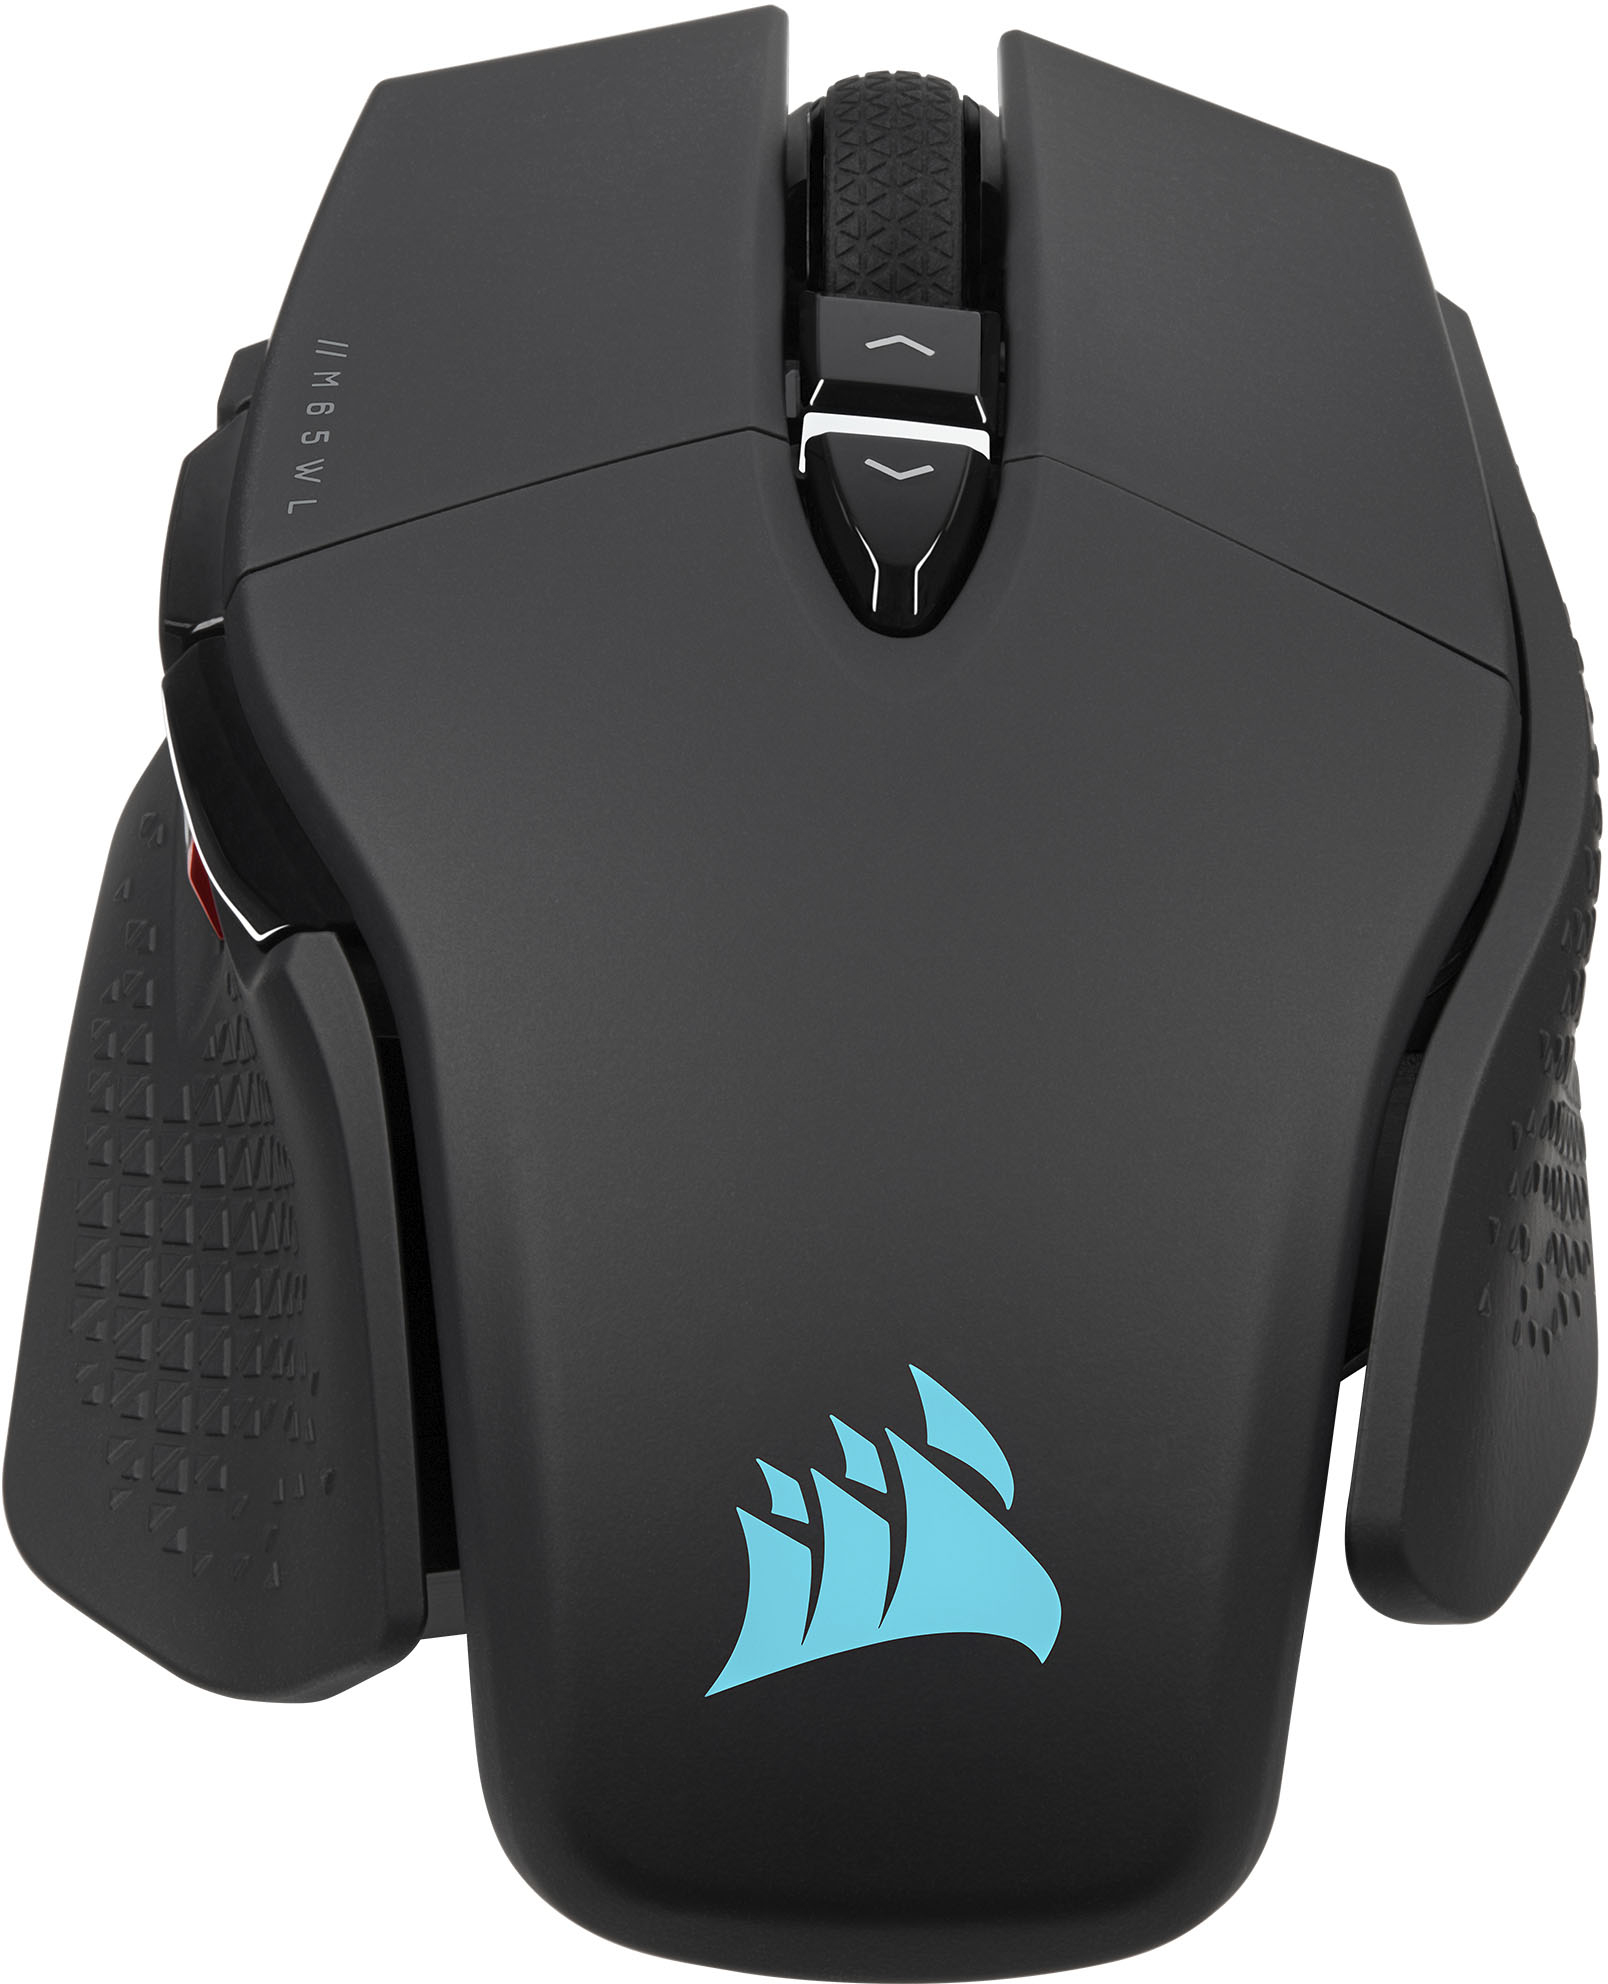 sammensmeltning andrageren melodramatiske CORSAIR M65 Ultra Wireless Optical Gaming Mouse with Slipstream Technology  Black CH-9319411-NA2 - Best Buy